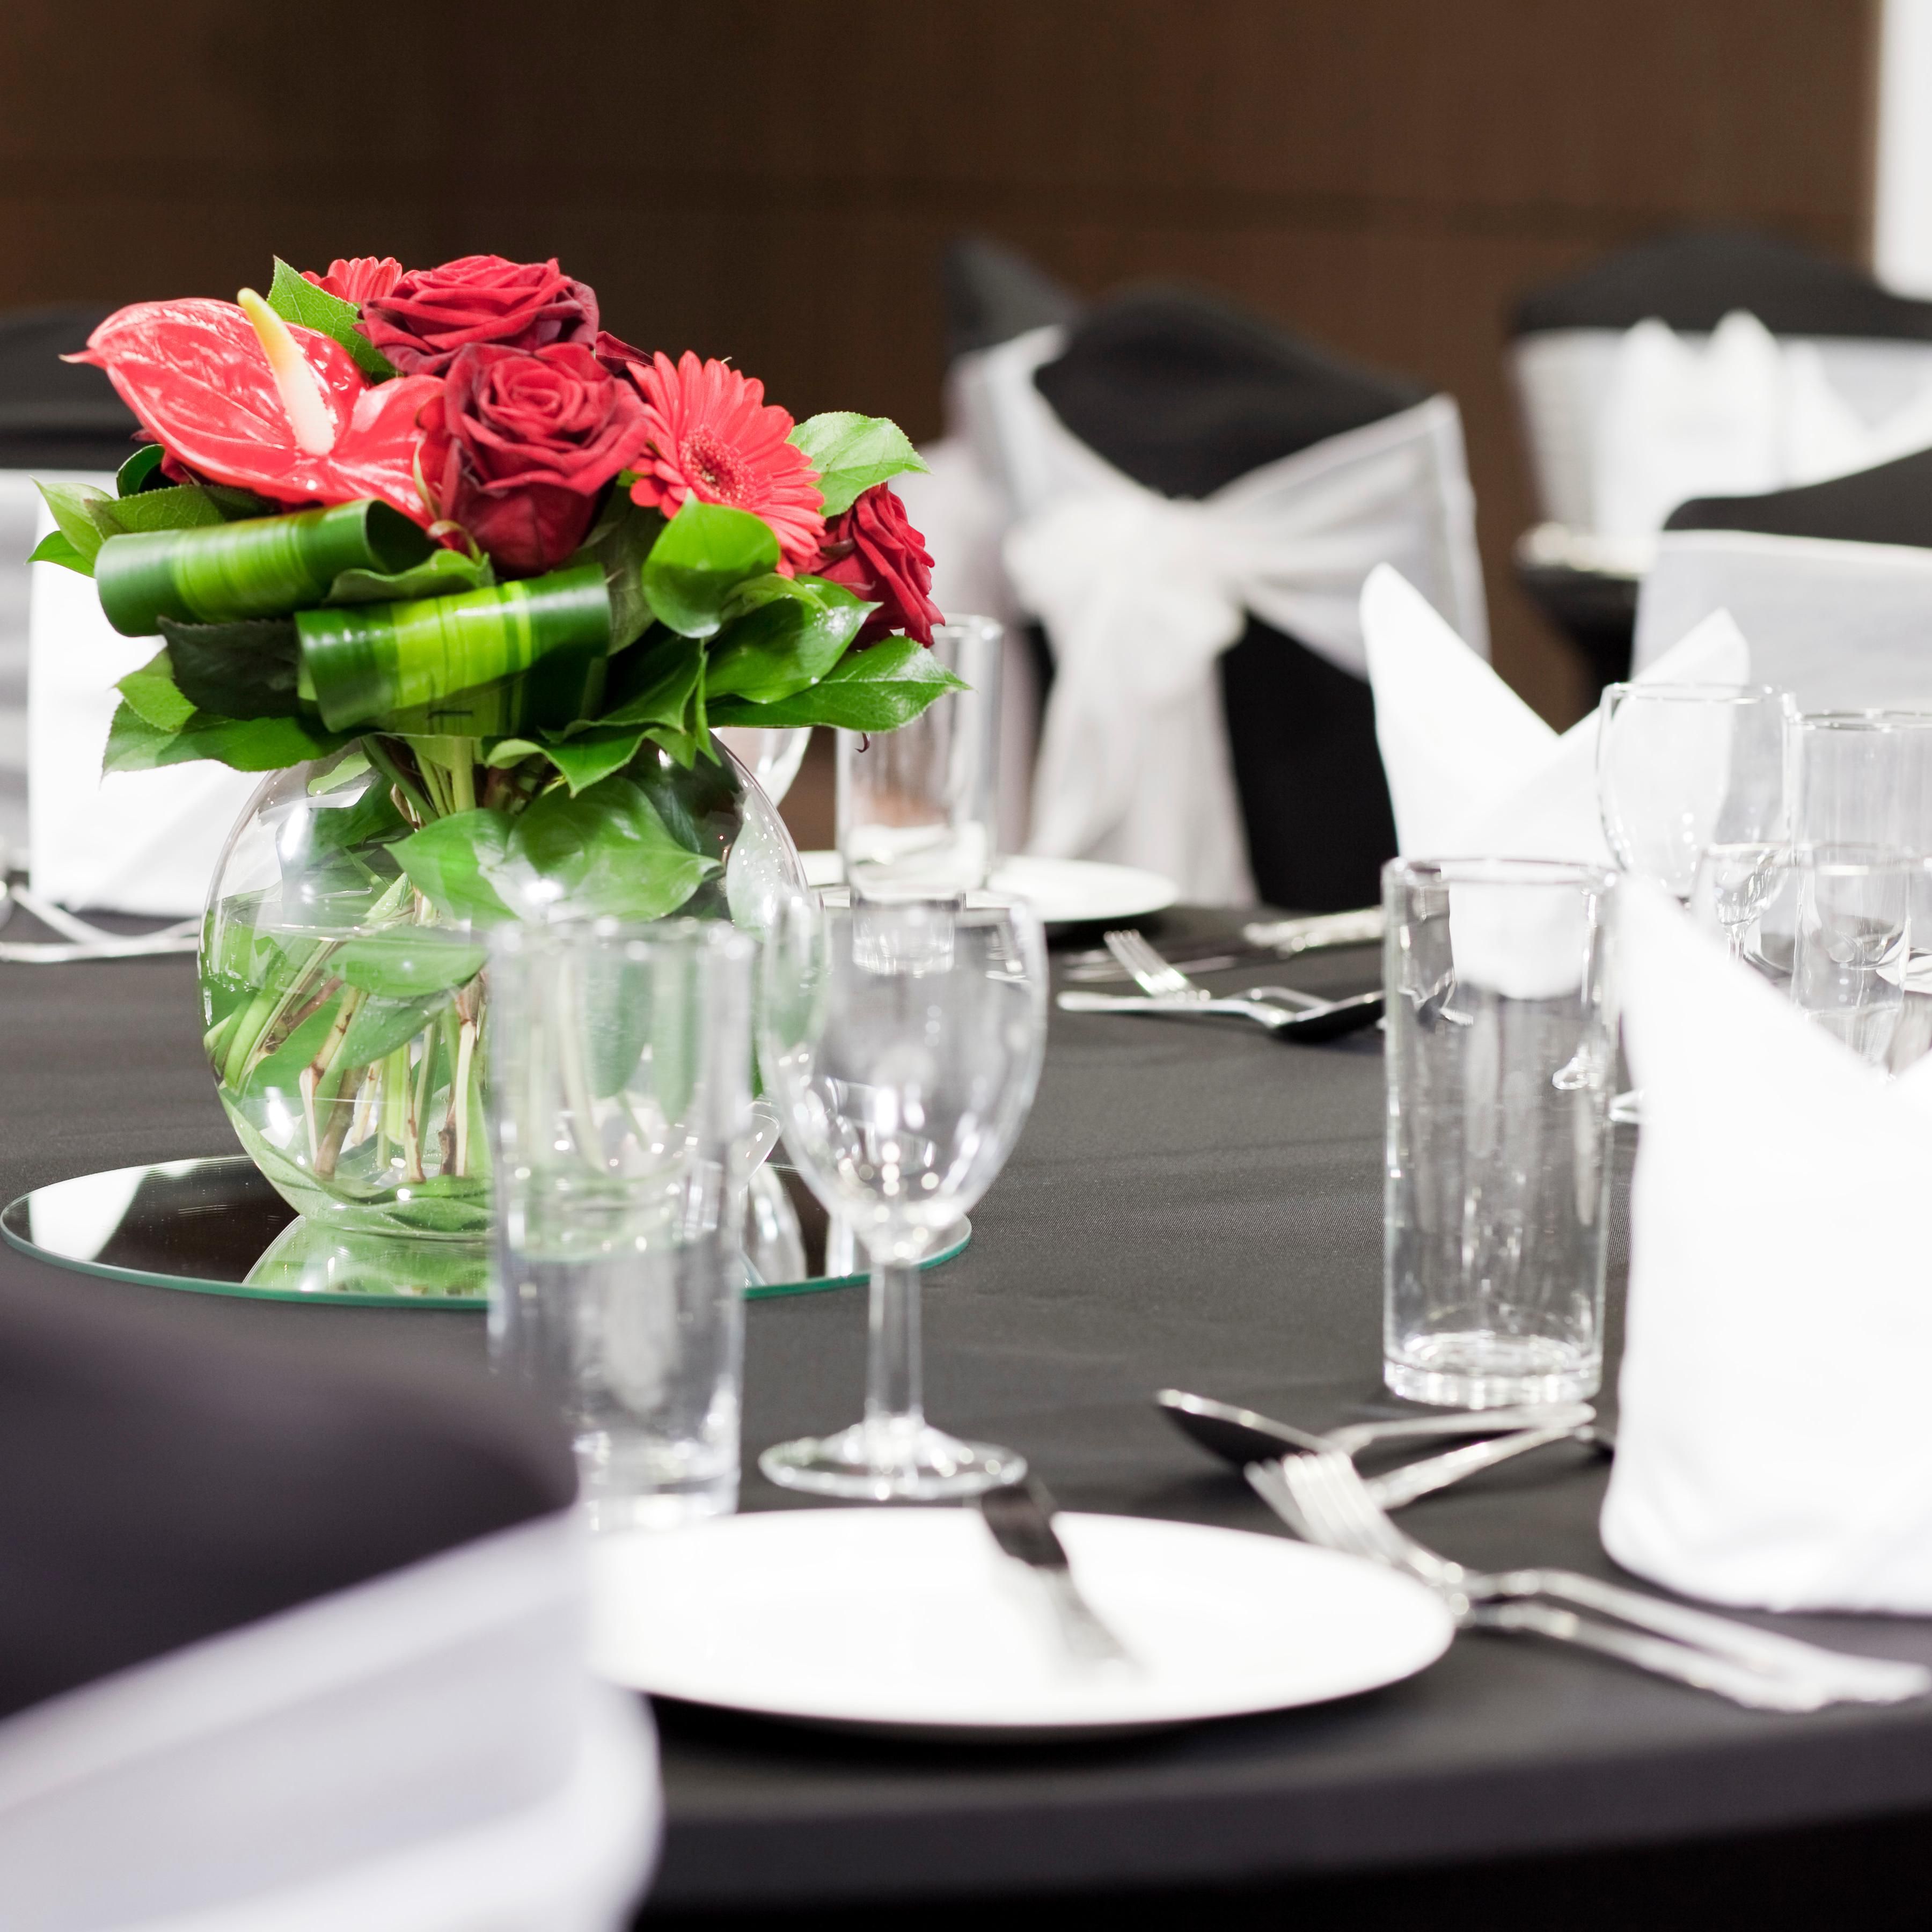 Special Events - The touches that make the event great